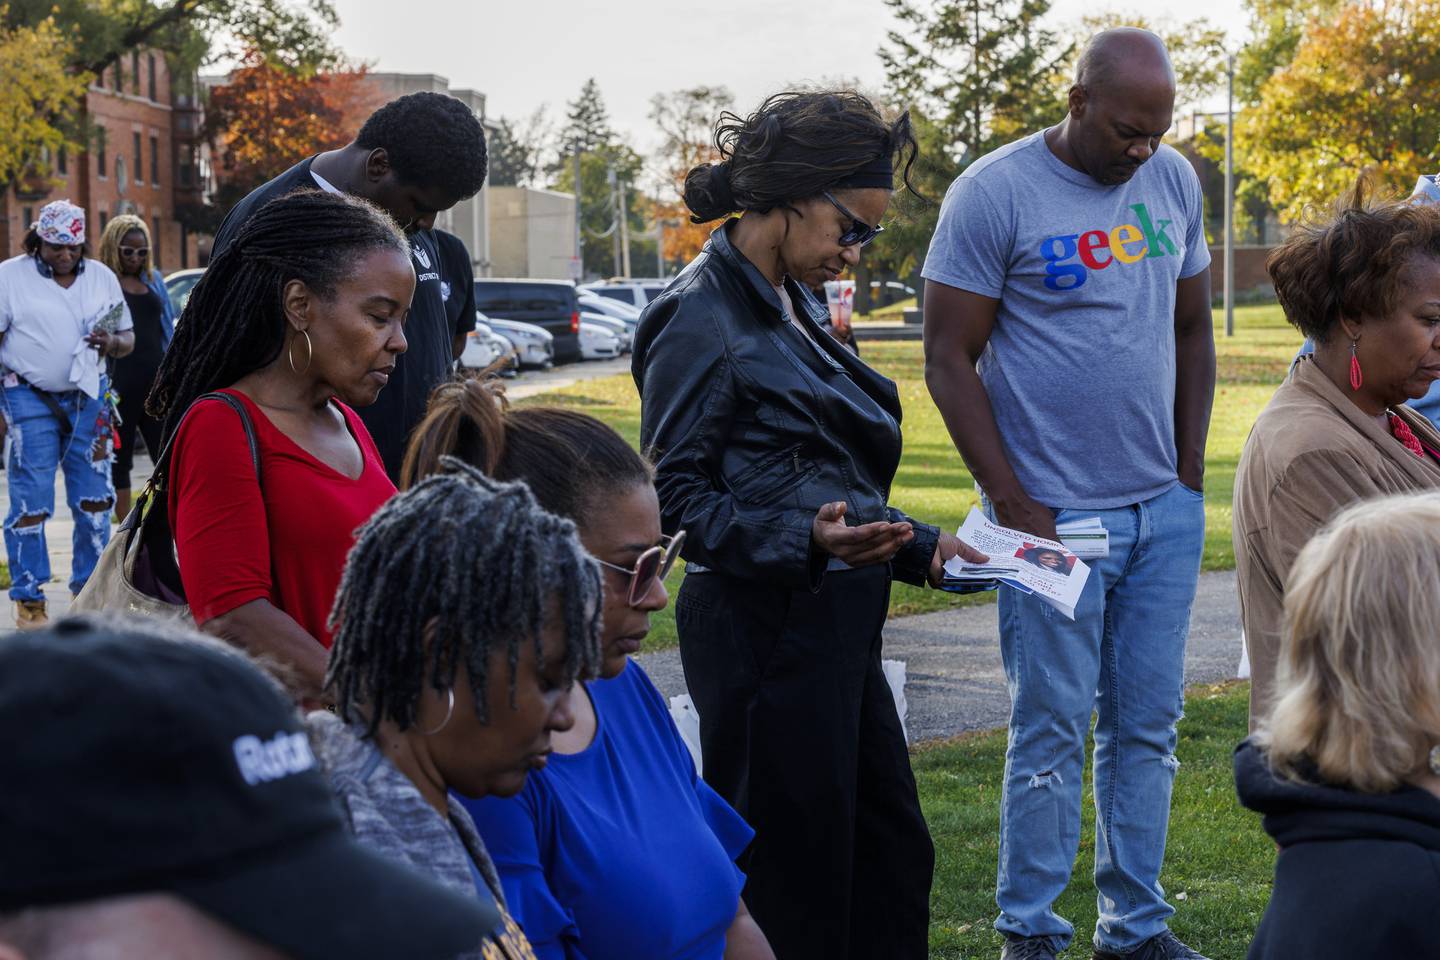 Attendees pray during the rally against gun violence.